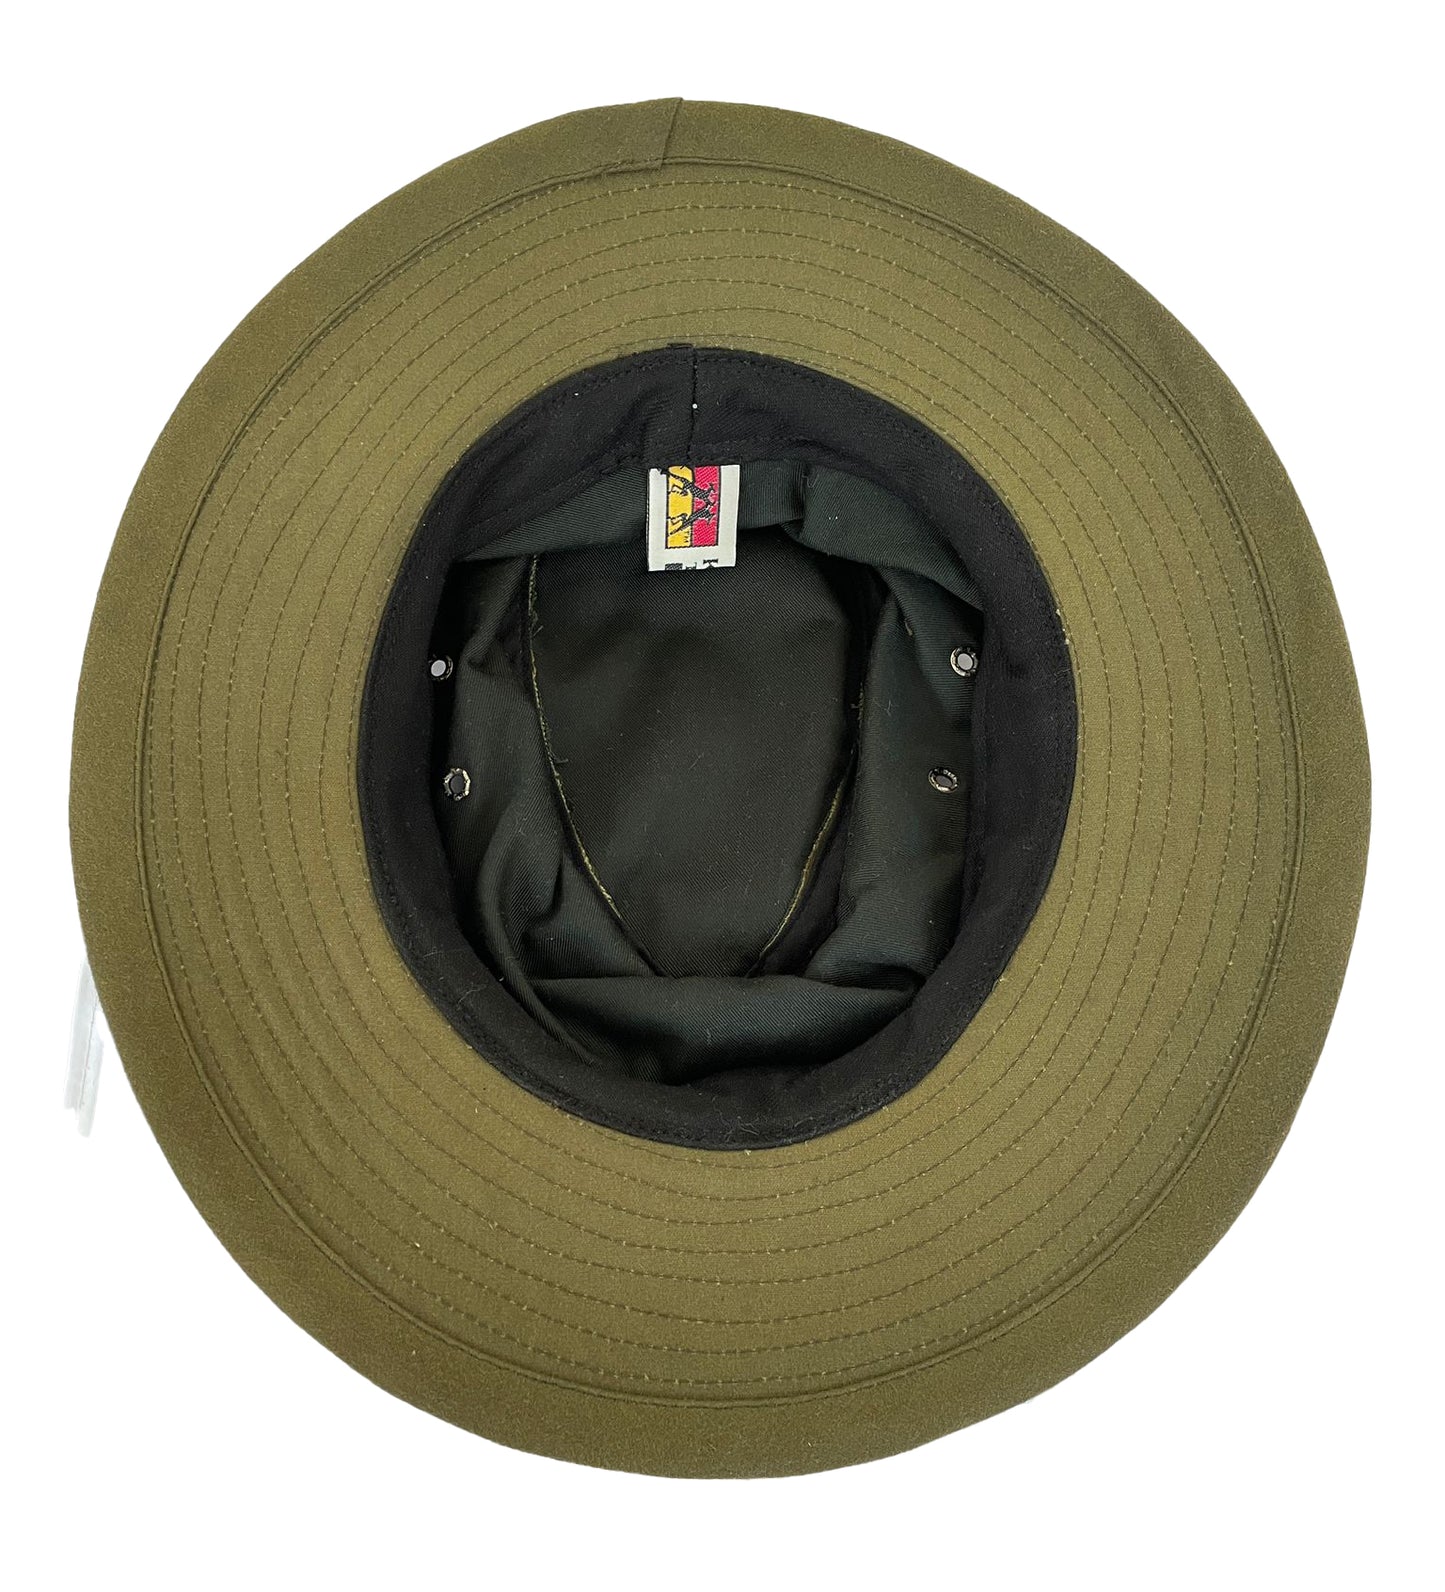 crumplable angler outdoor hat made of oiled cotton | Water and wind-repellent